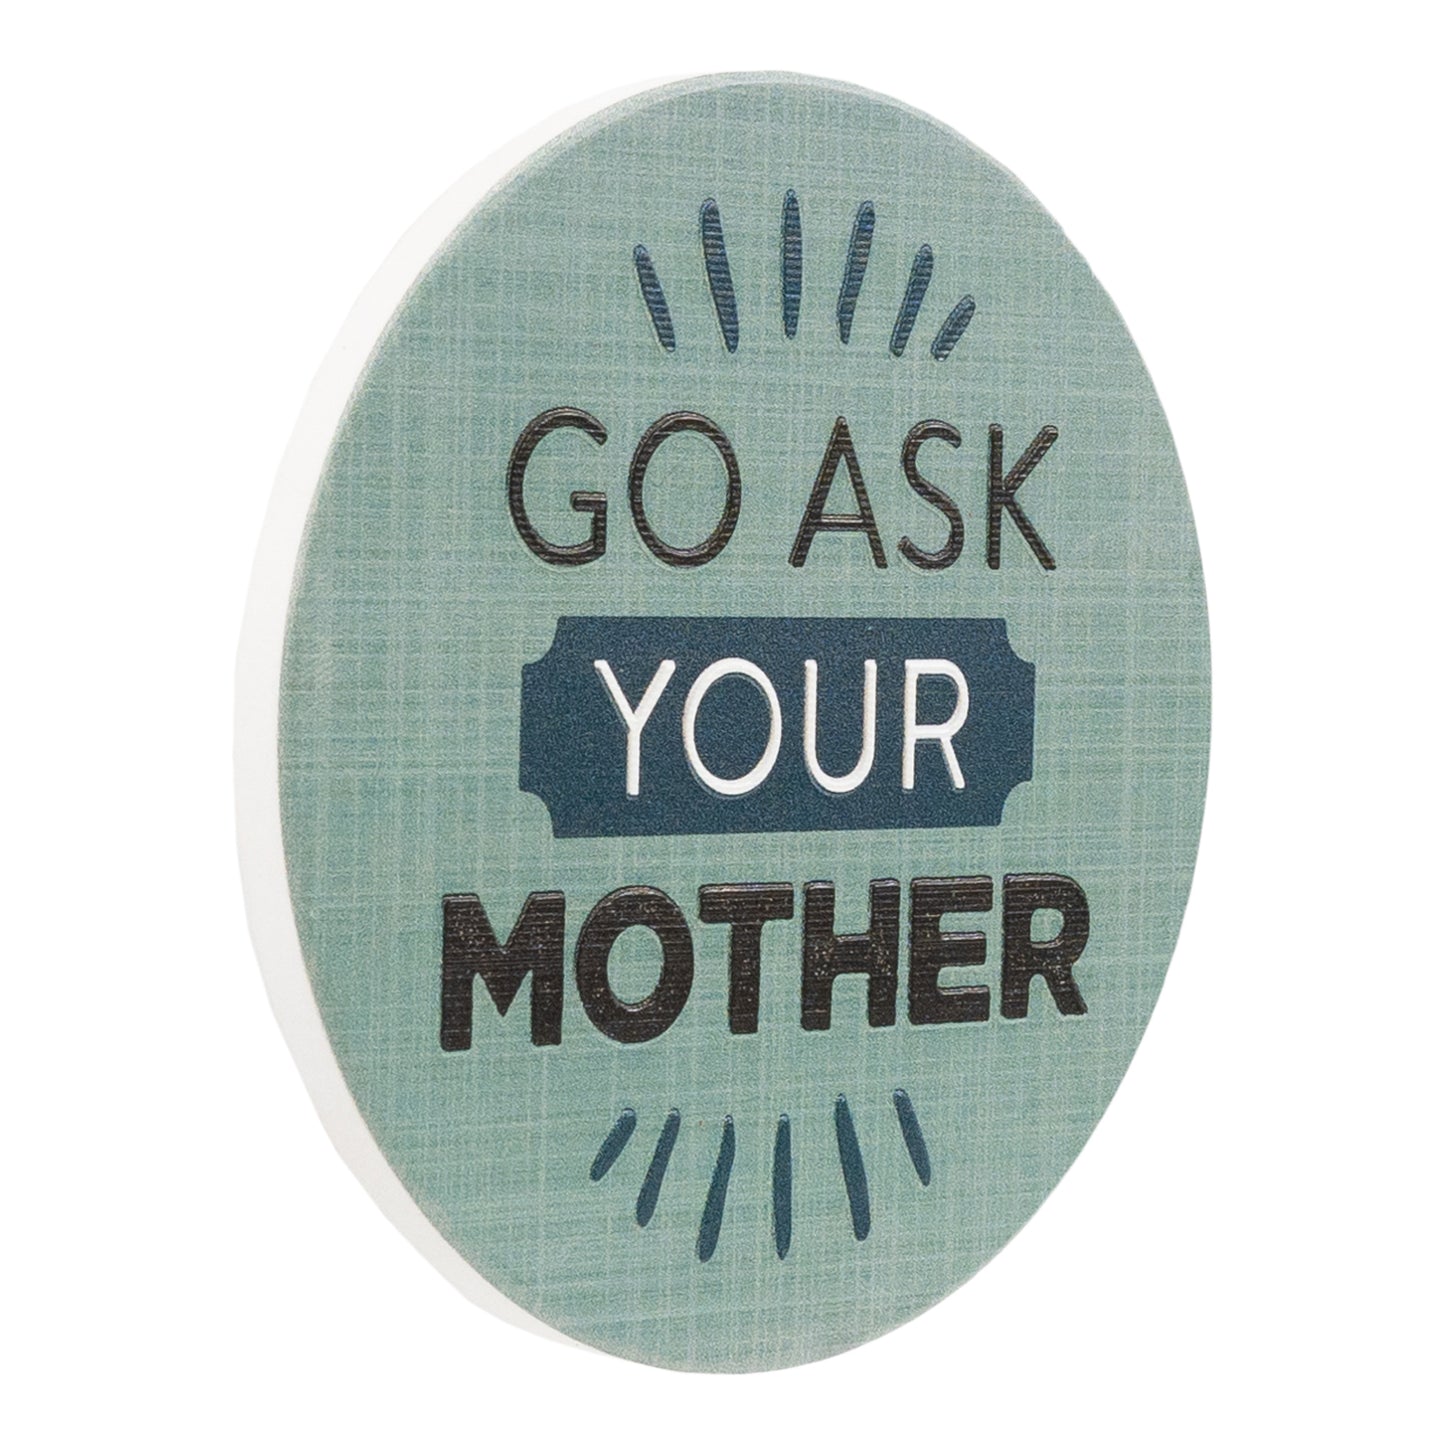 Ask Your Mother Coaster